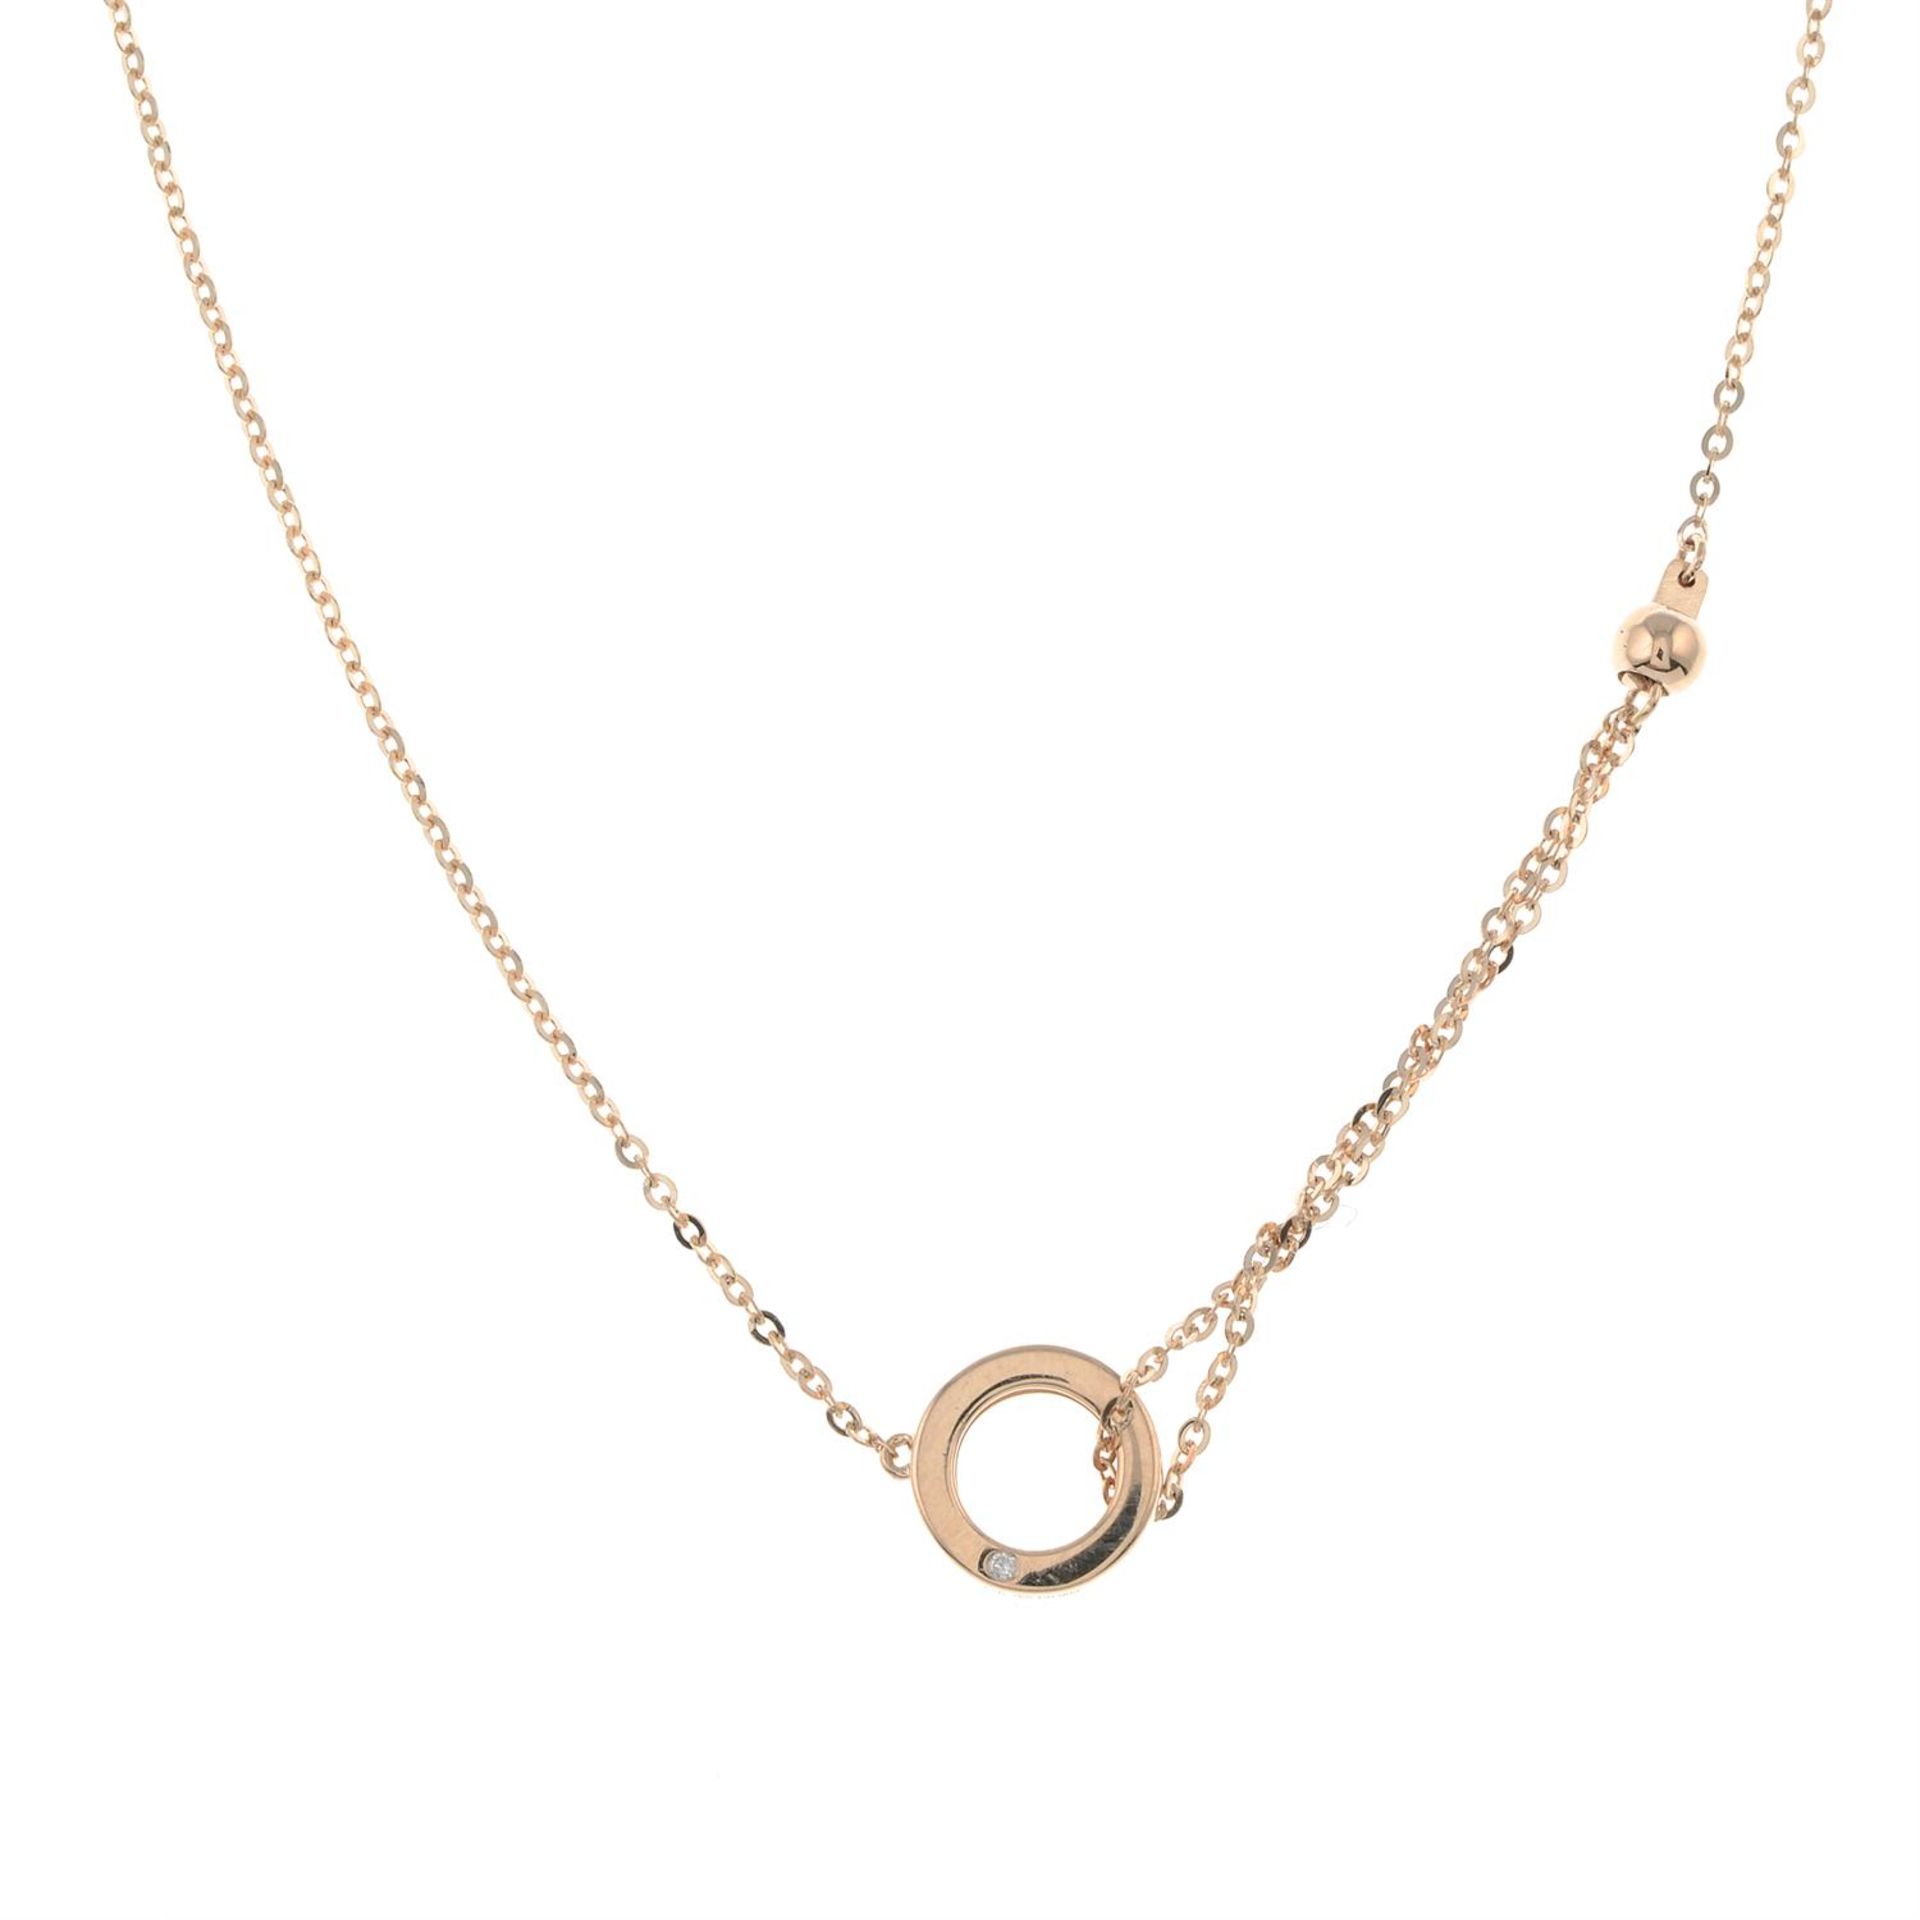 A diamond hoop pendant, with integral chain.